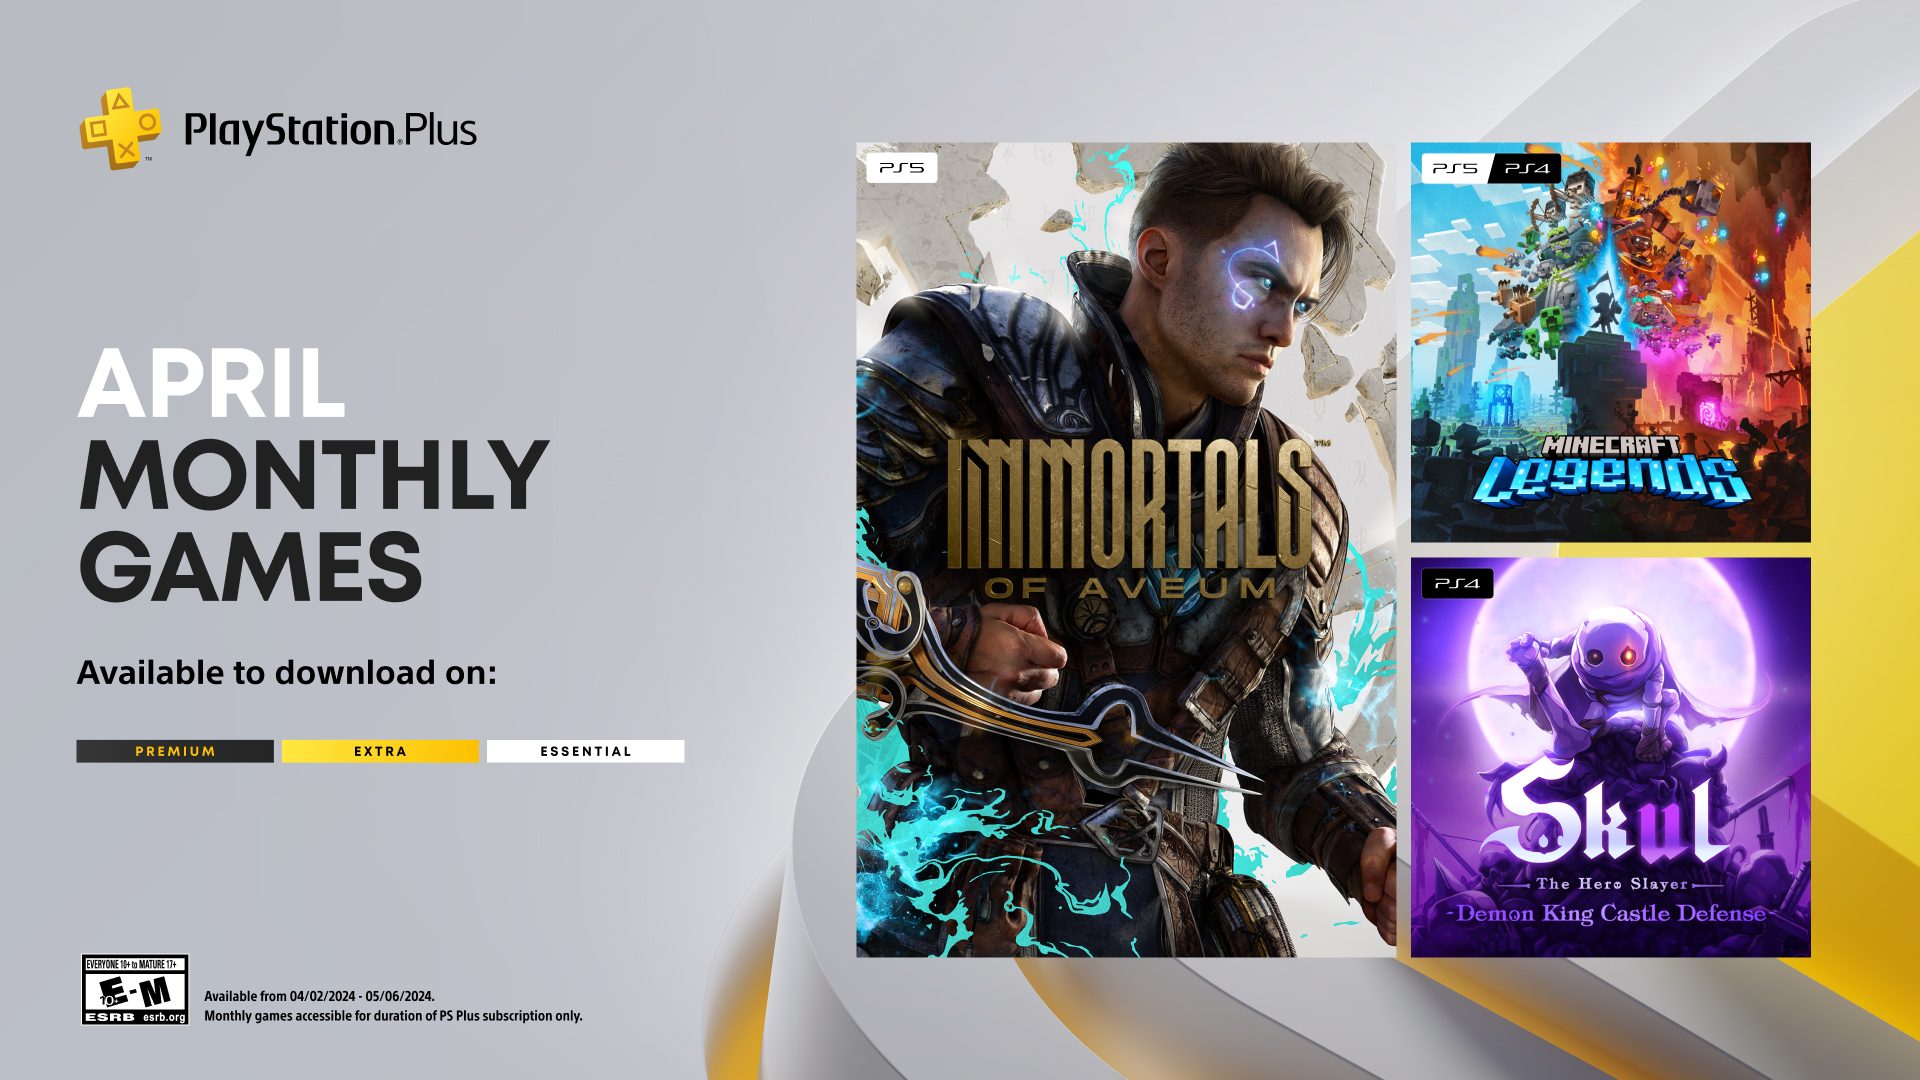 Ready go to ... https://blog.playstation.com/2024/03/27/playstation-plus-monthly-games-for-april-immortals-of-aveum-minecraft-legends-skul-the-hero-slayer/ [ PlayStation Plus Monthly Games for April: Immortals of Aveum, Minecraft Legends, Skul: The Hero Slayer]